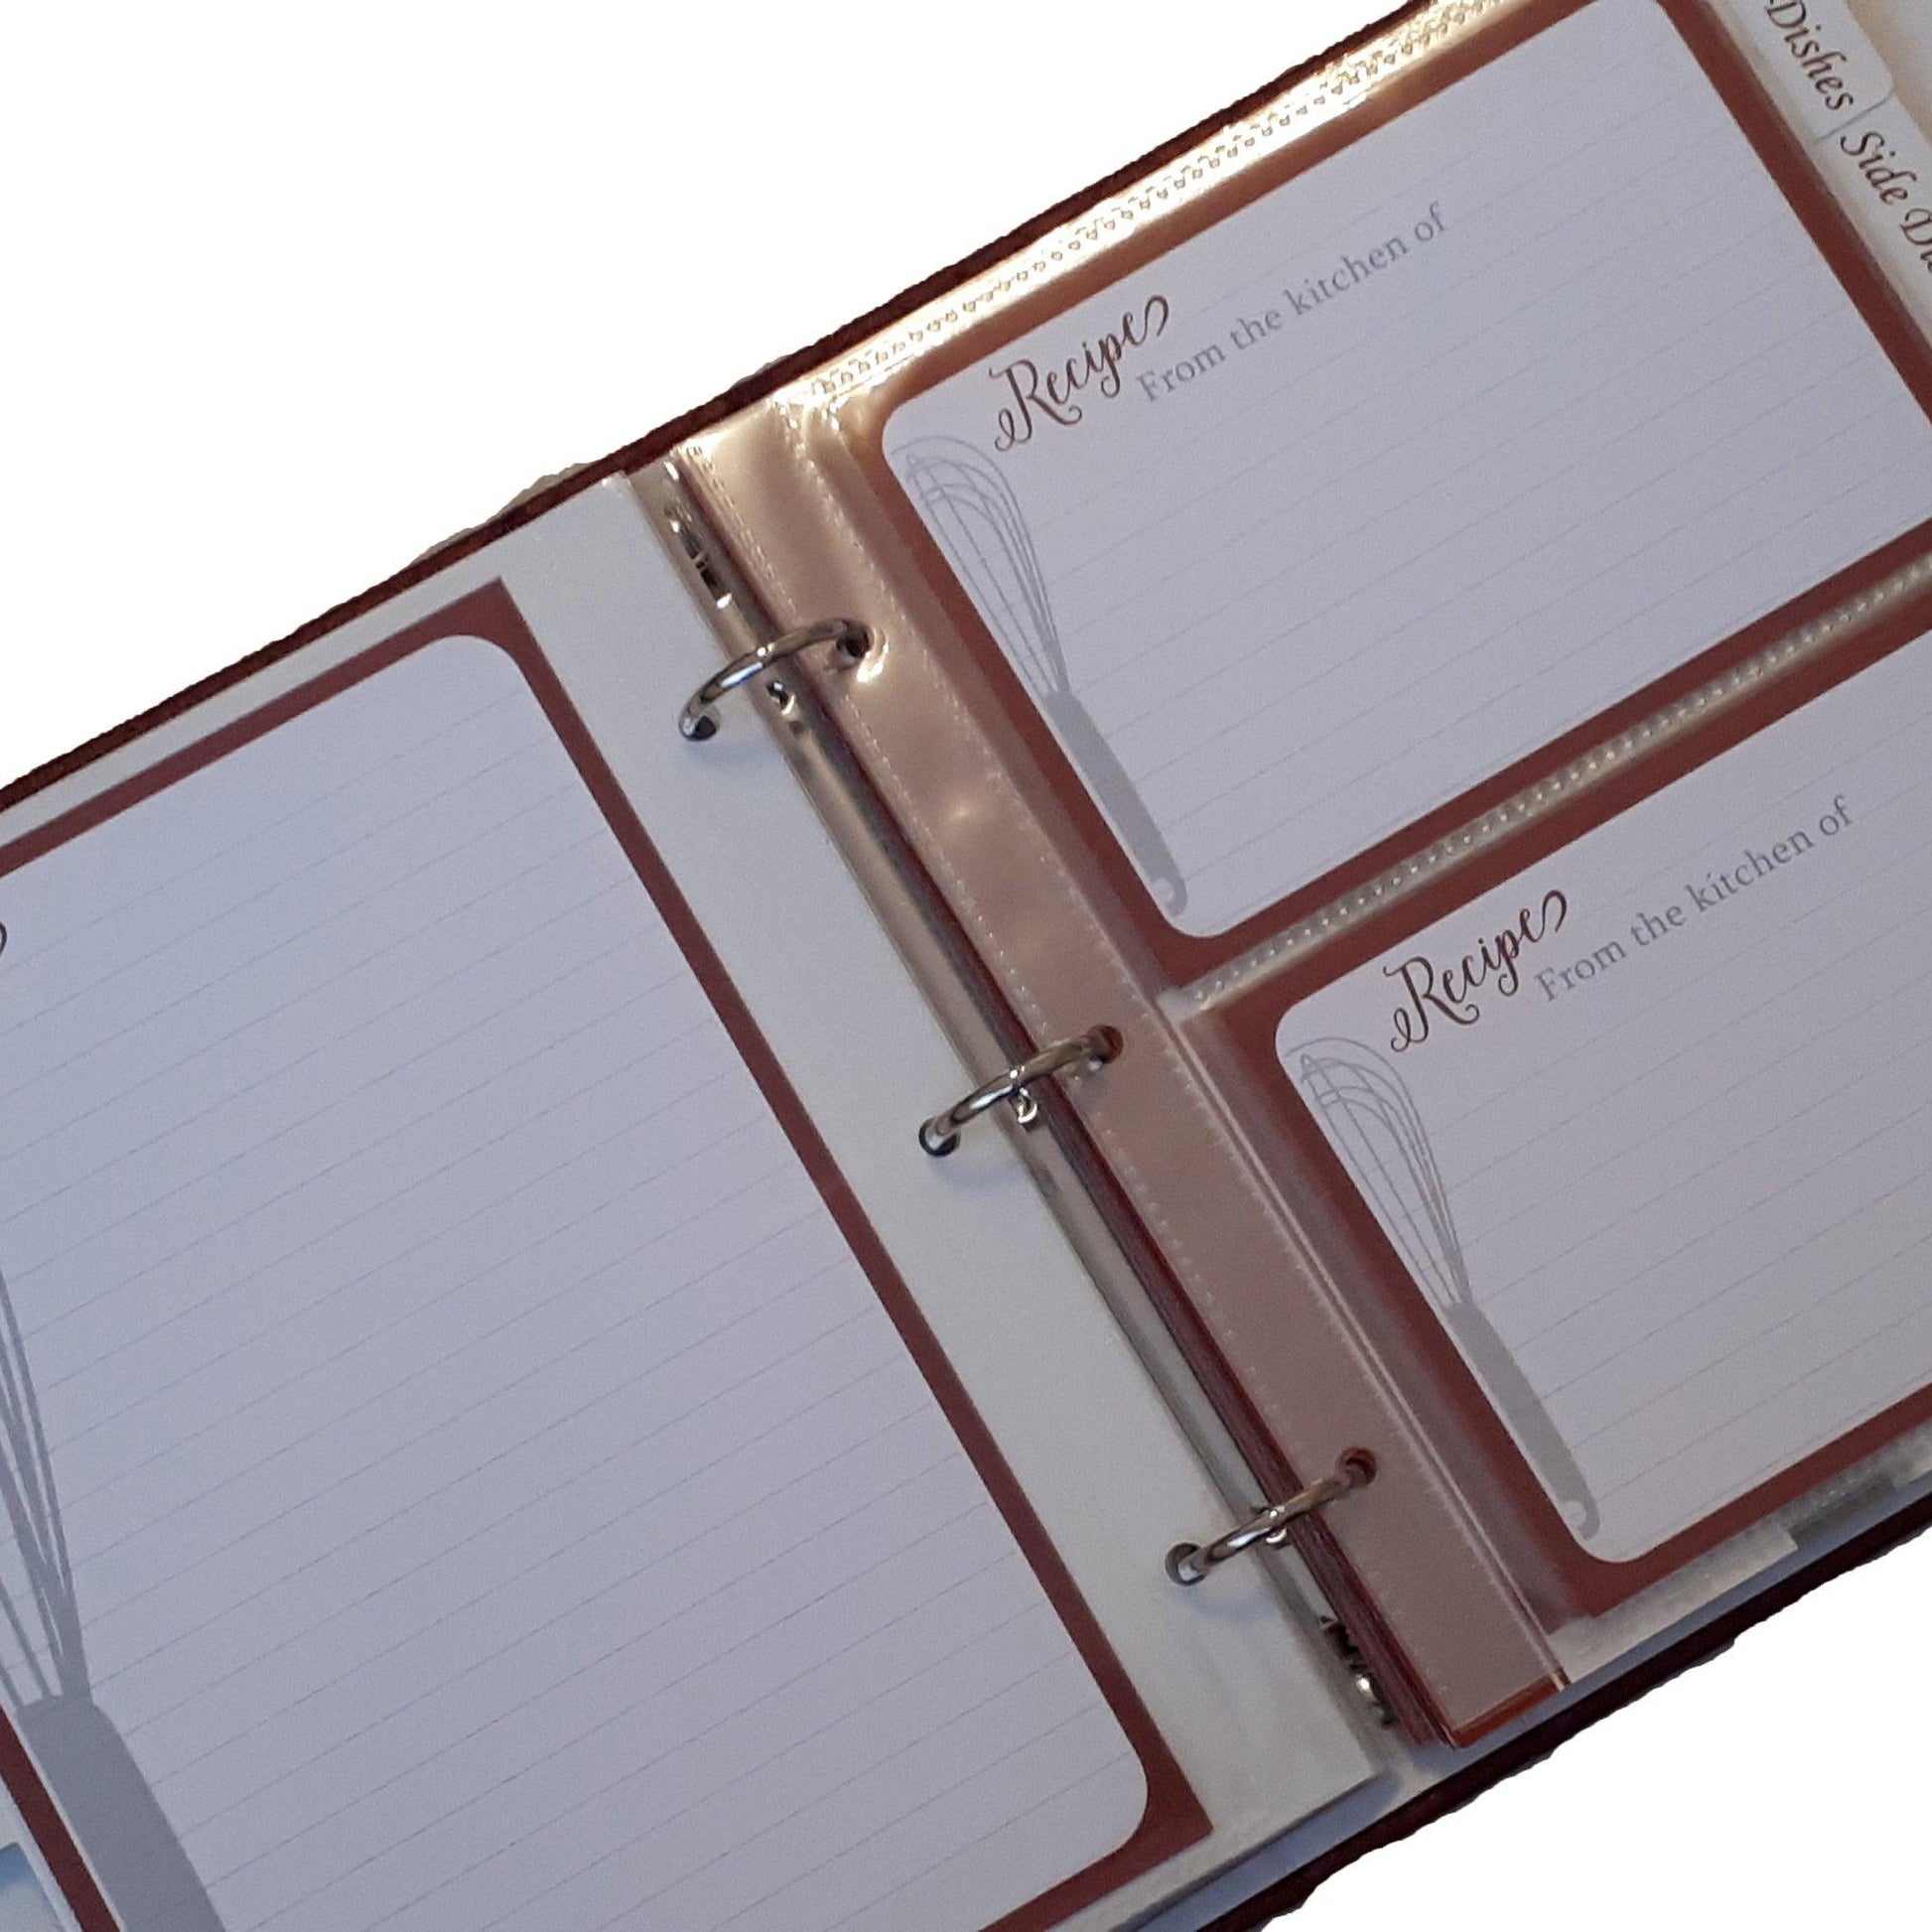 Inside view of recipe book - dividers and cards